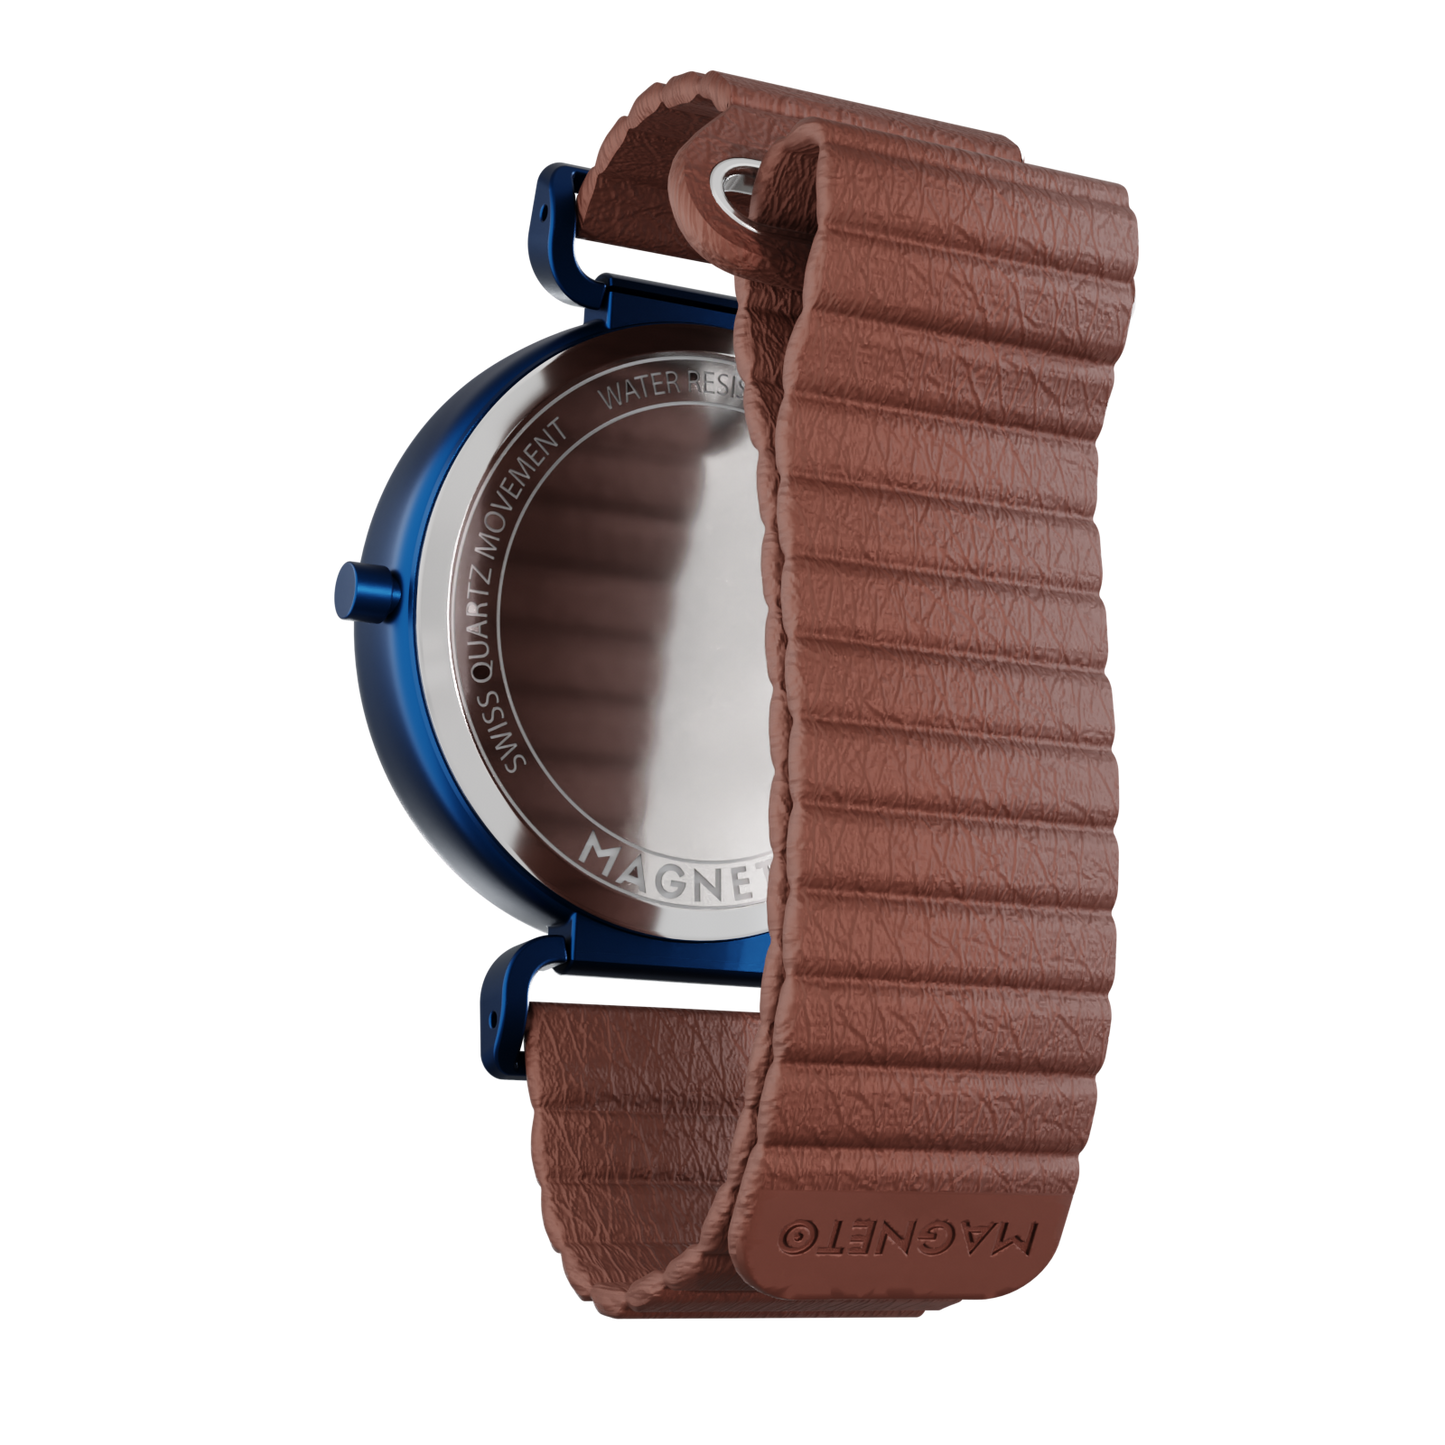 Primus Blue synthetic leather magnetic brown